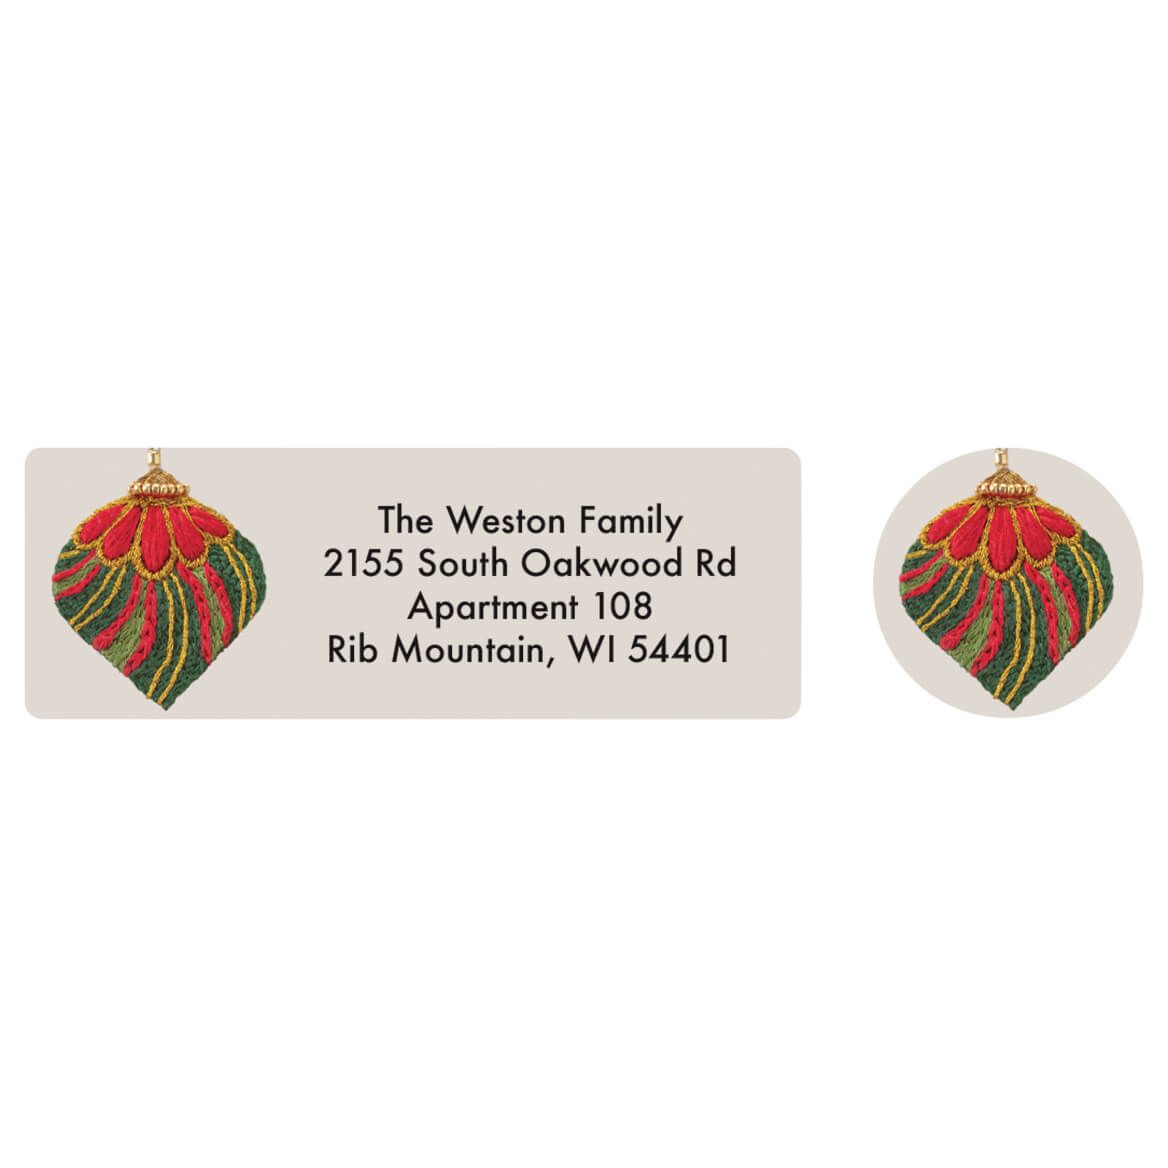 Personalized Festive Ornaments Labels and Seals, Set of 20 + '-' + 374987